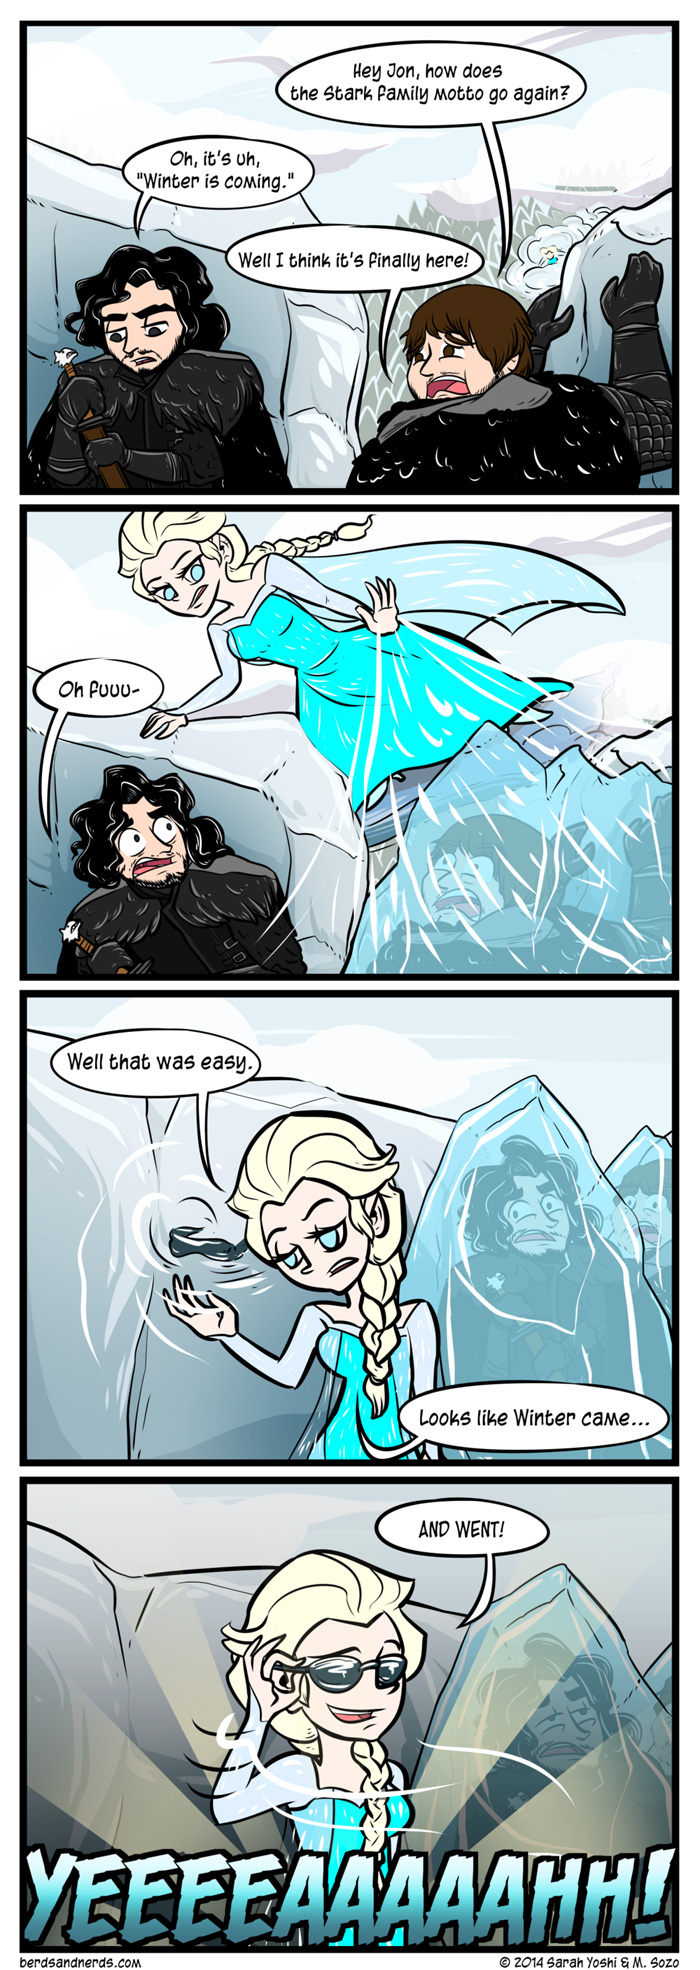 Game of Thrones Frozen Comic - The Wolf Who Cried Winter